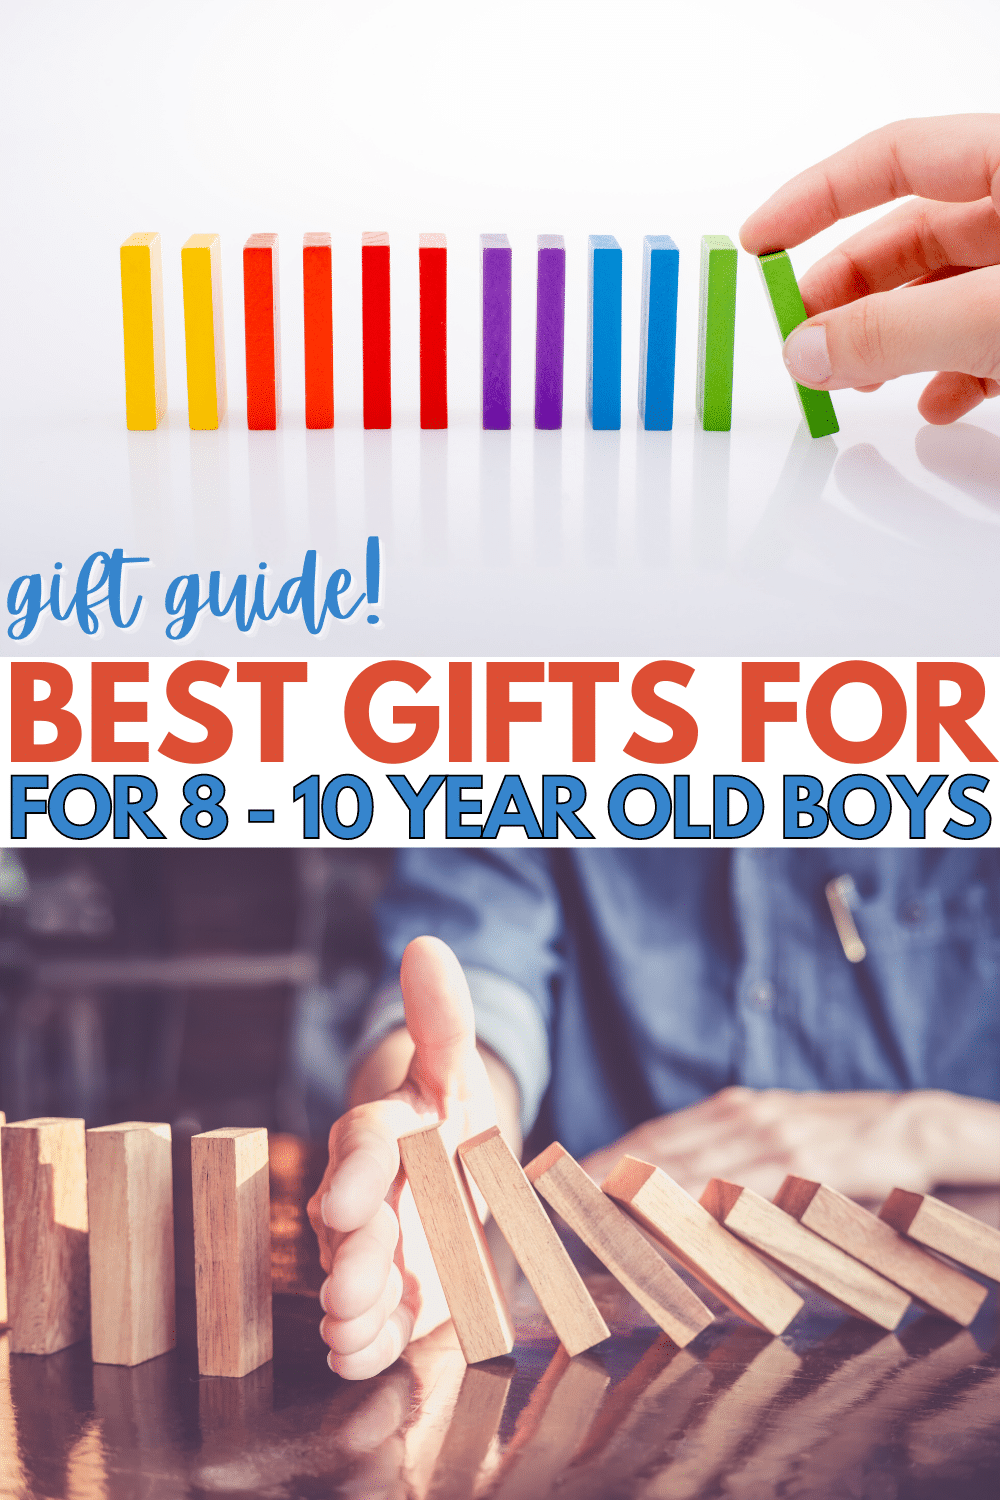 Here's a list of the best gifts for 8 to 10-year old boys. They are fun to shop for because they're full of spunk, creativity, logic and fine motor skills. #giftguide #giftideas #forboys #boys8to10 via @wondermomwannab